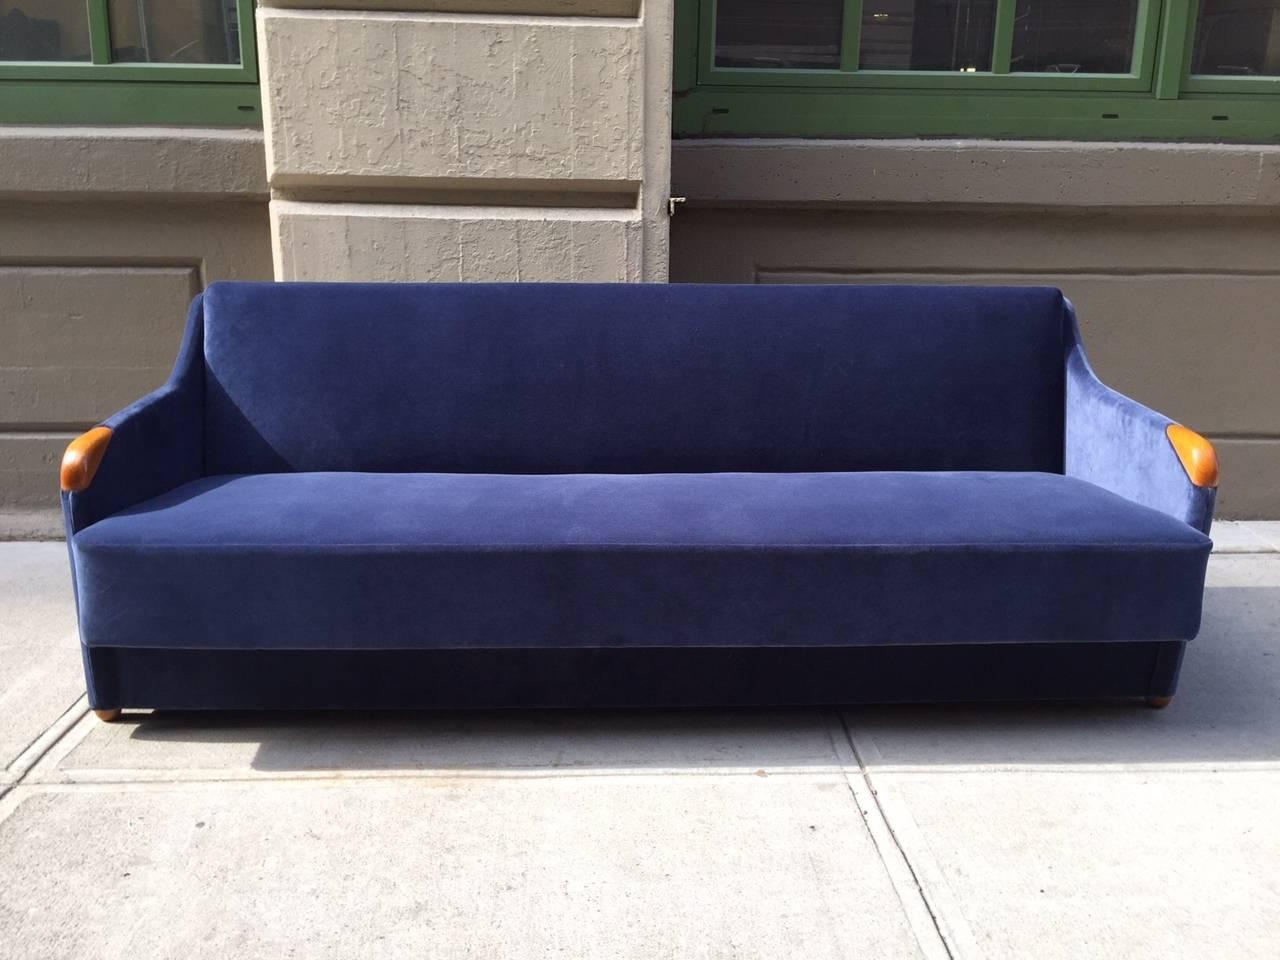 1950s sleeper sofa / daybed in blue velvet. Nice sofa which converts to a bed. Has sculptural oak legs and oak trim.
Measures (as a sofa) 78